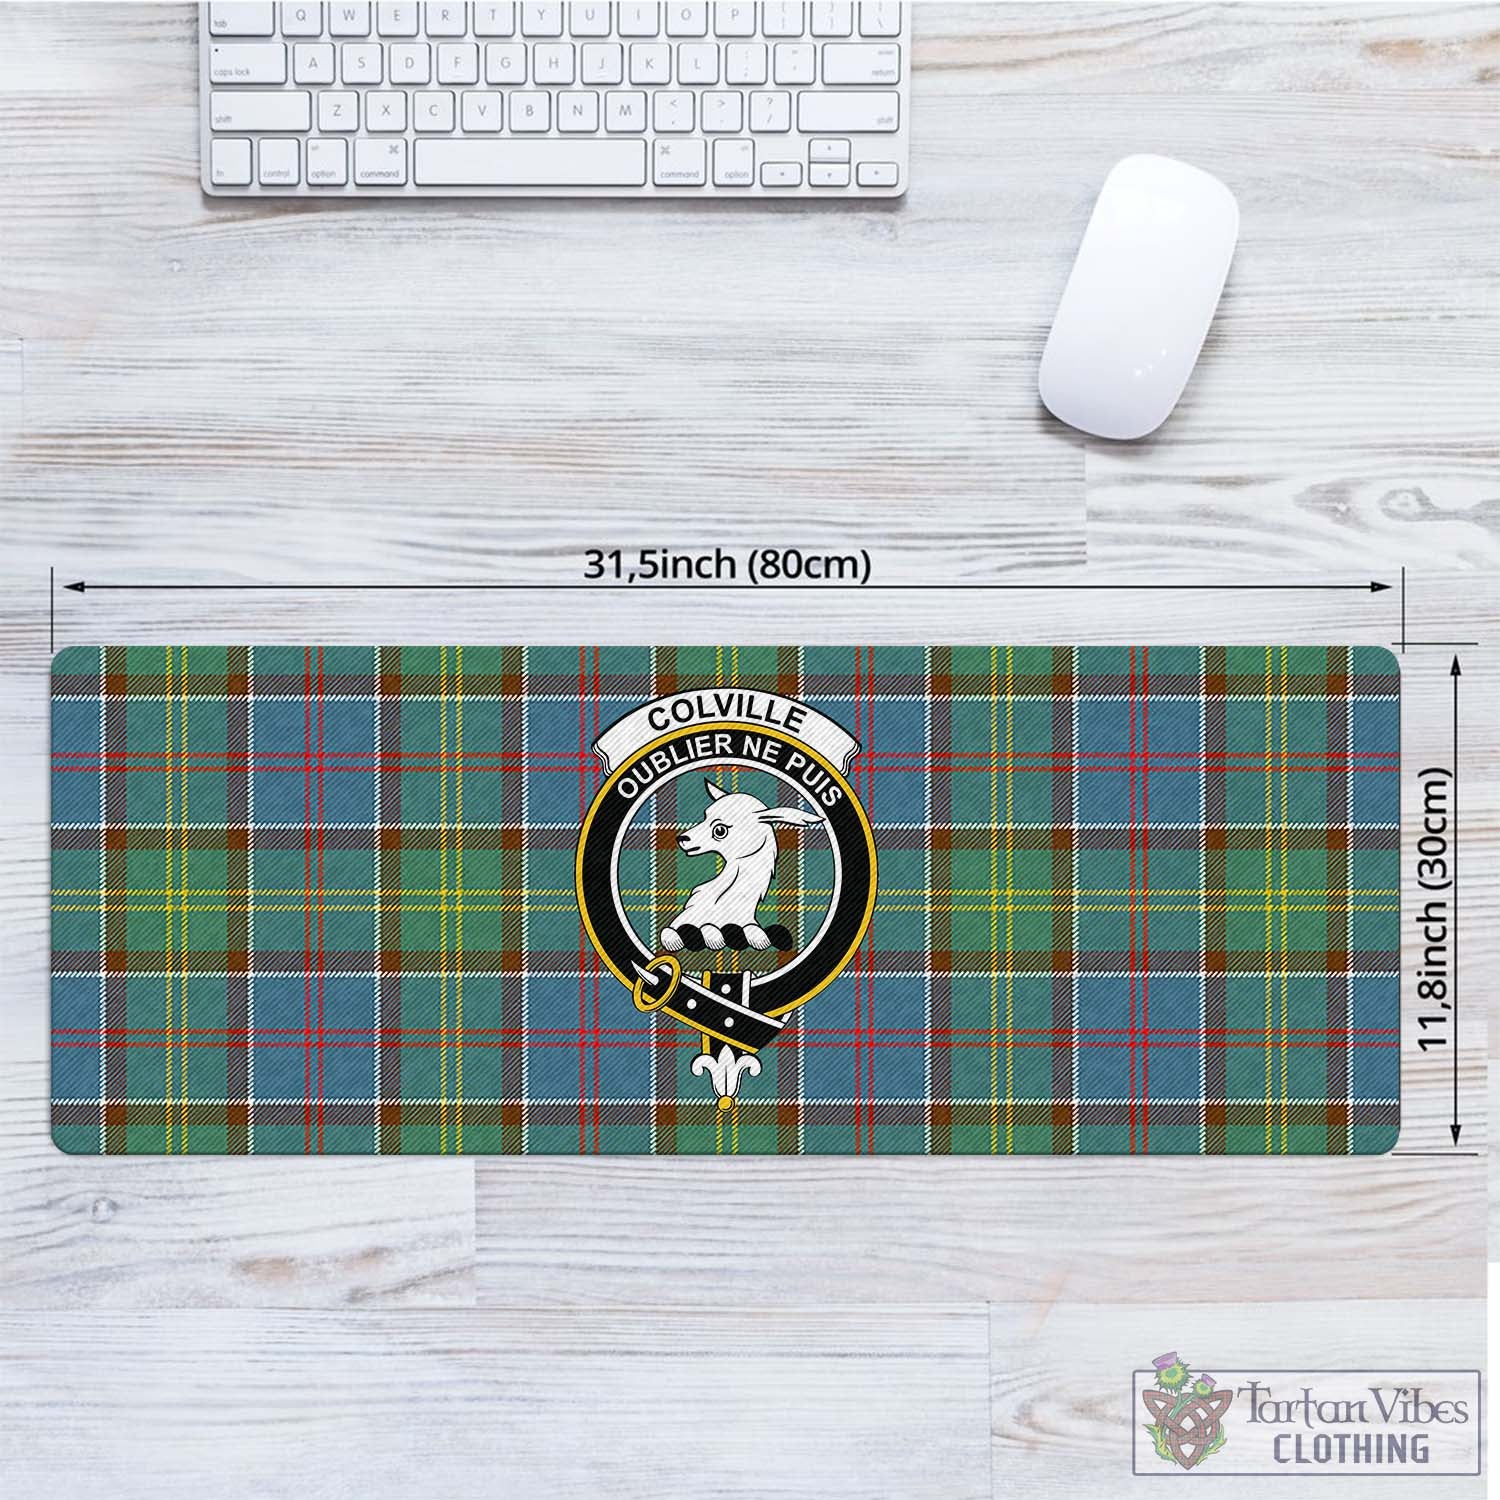 Tartan Vibes Clothing Colville Tartan Mouse Pad with Family Crest